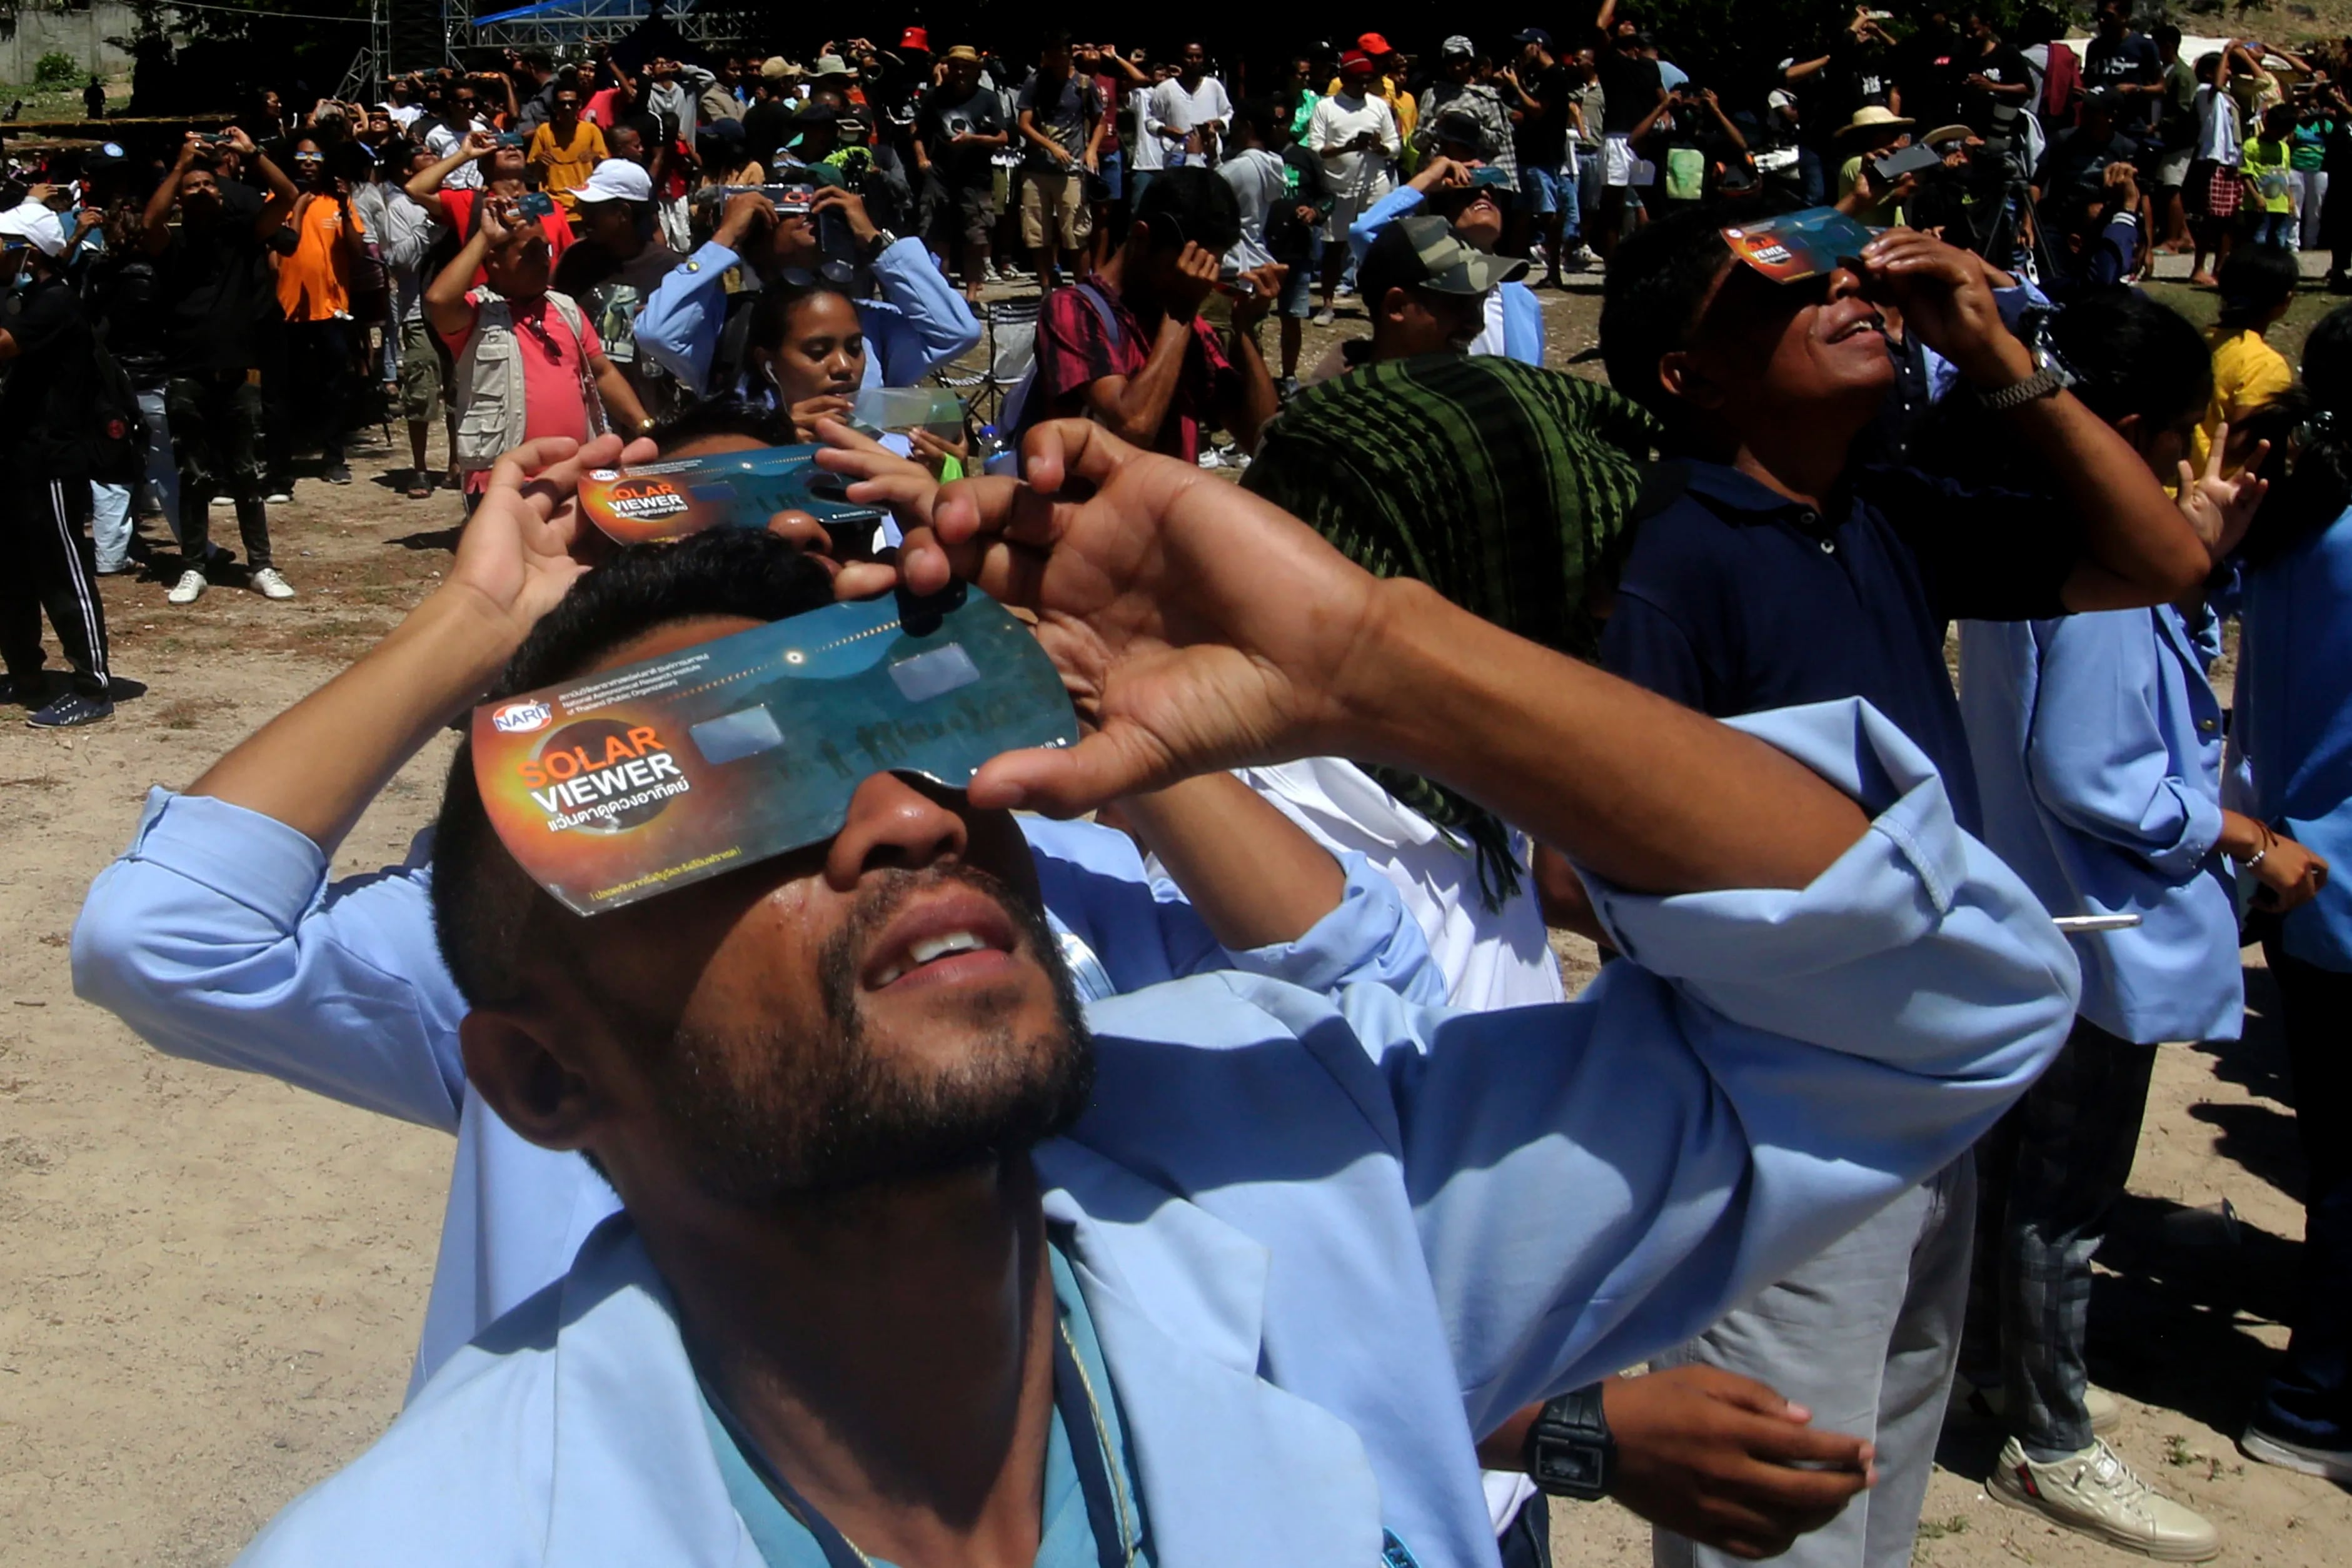 People use protective glasses to watch a hybrid solar eclipse in Lautem, East Timor, on April 20, 2023. The lucky few people in its path either saw the darkness of a total eclipse or a “ring of fire” as the sun peeked from behind the new moon.